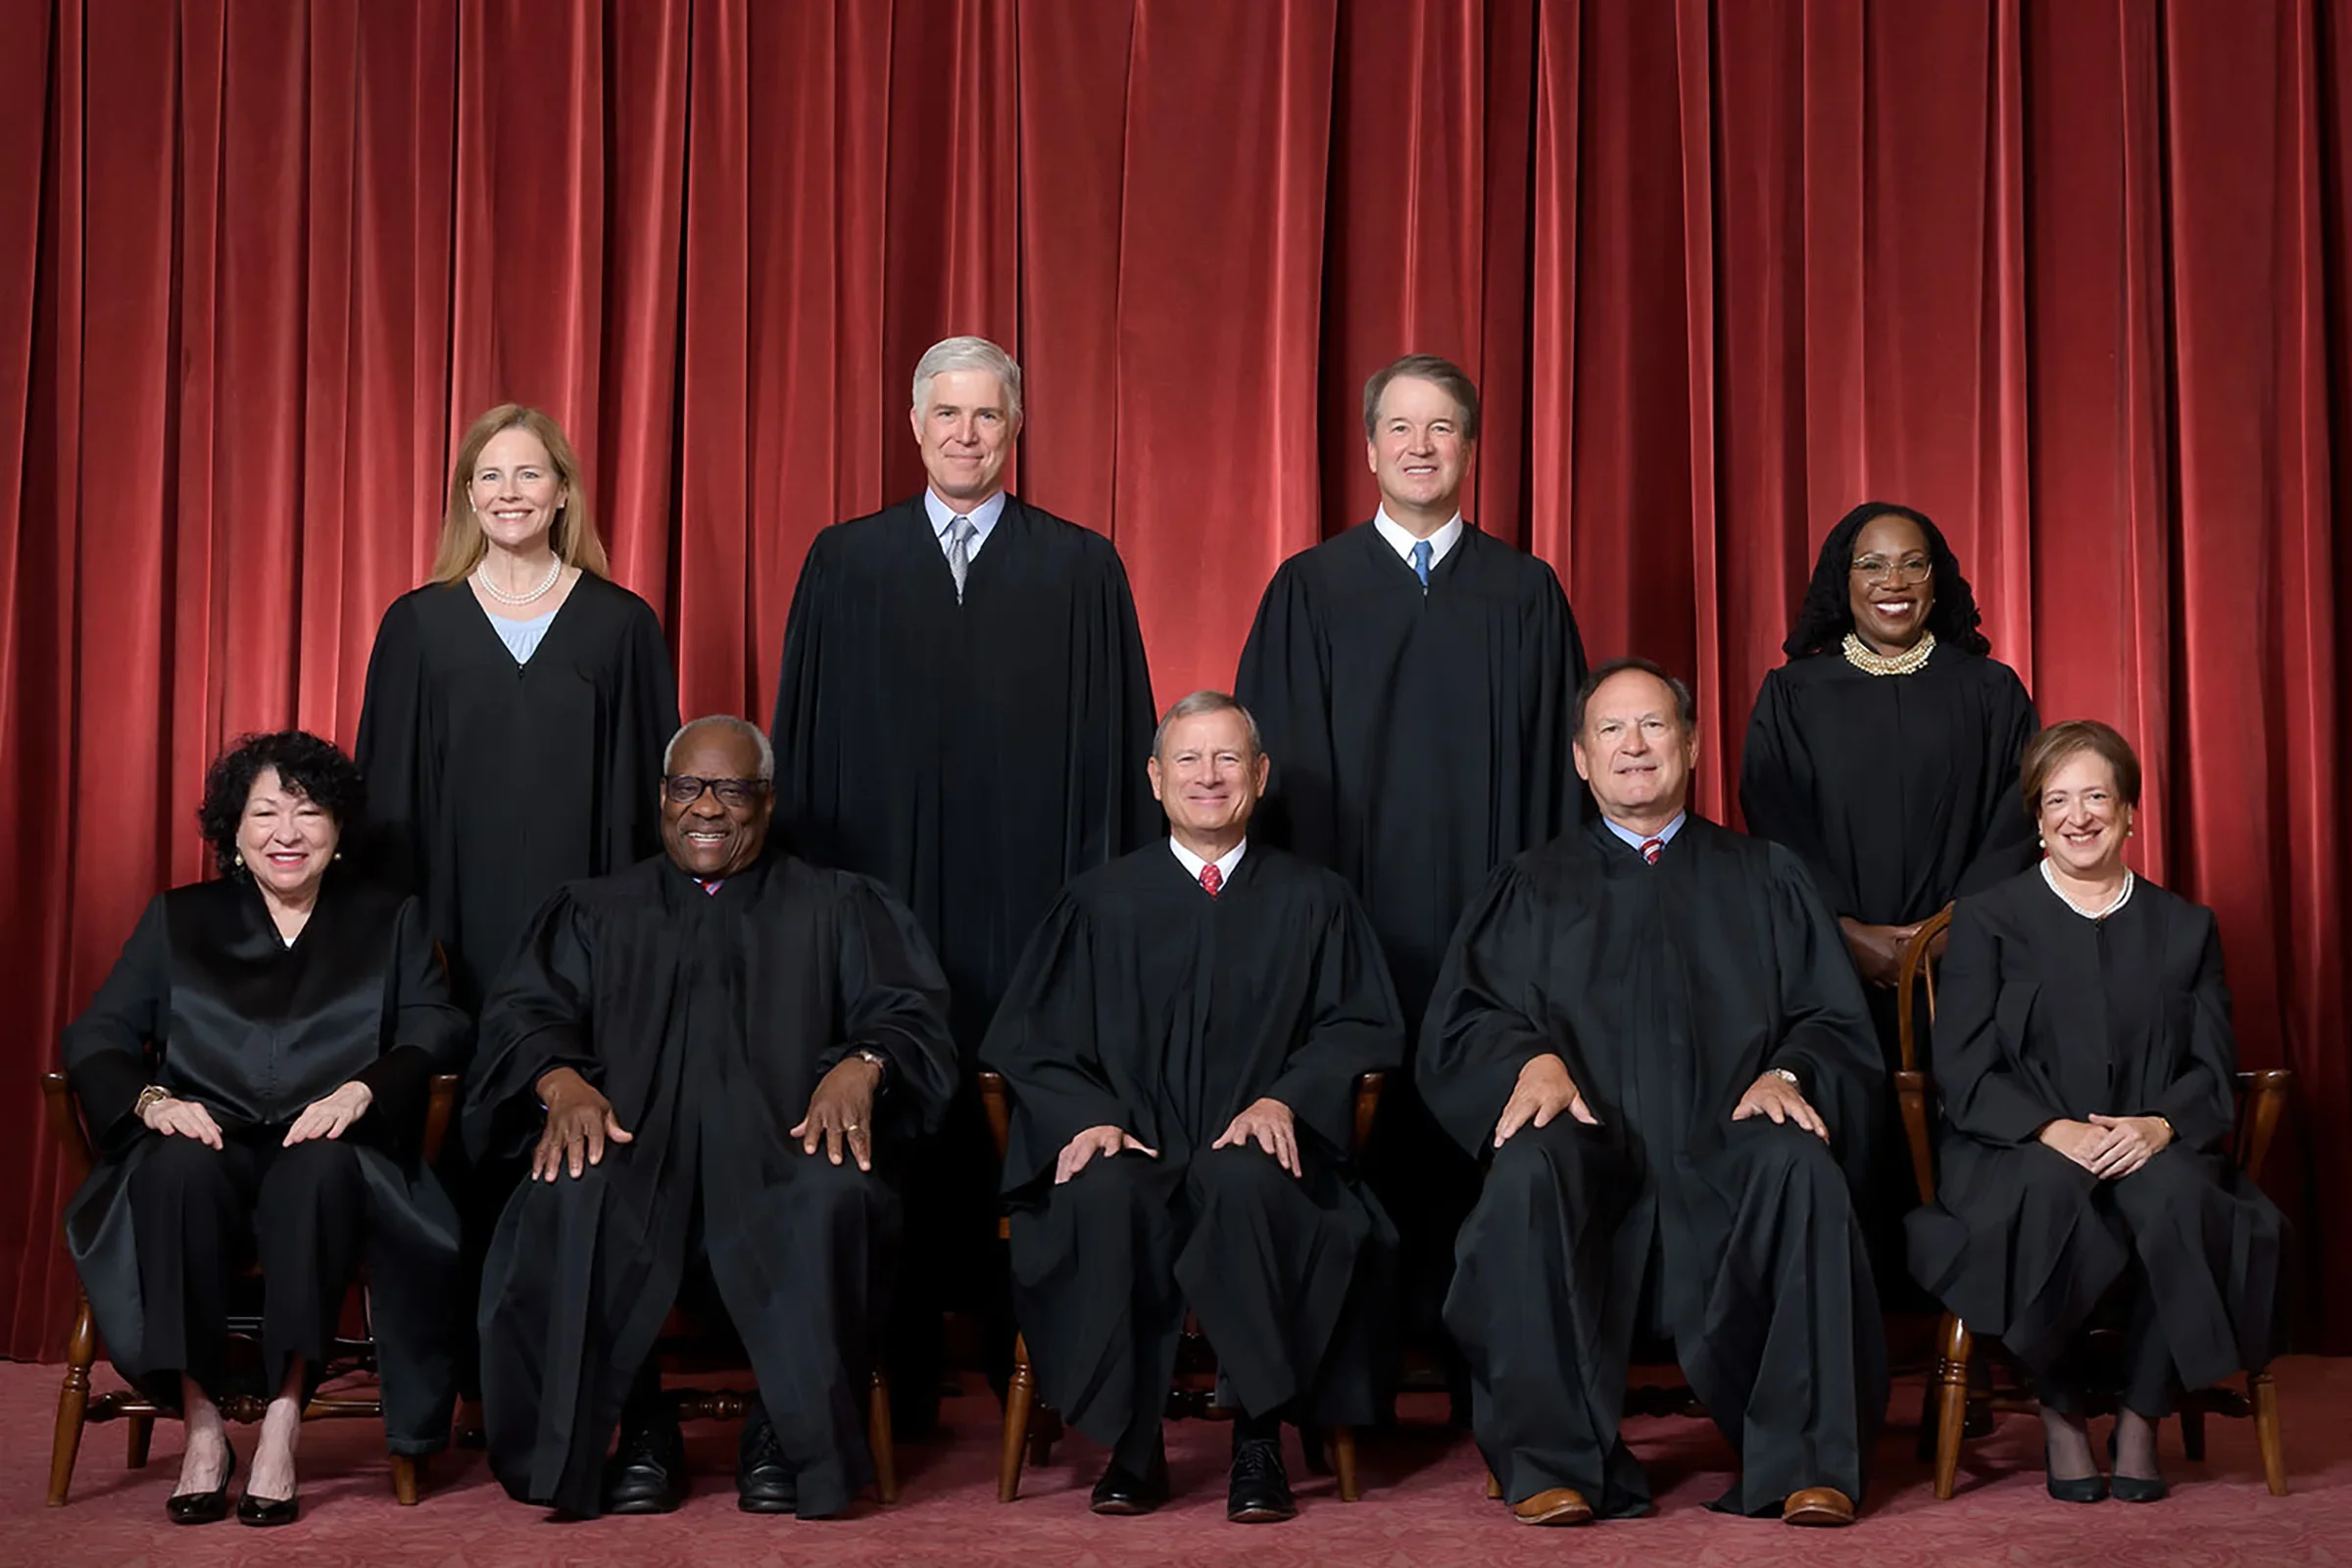  The U.S. Supreme Court: A Very Short Introduction